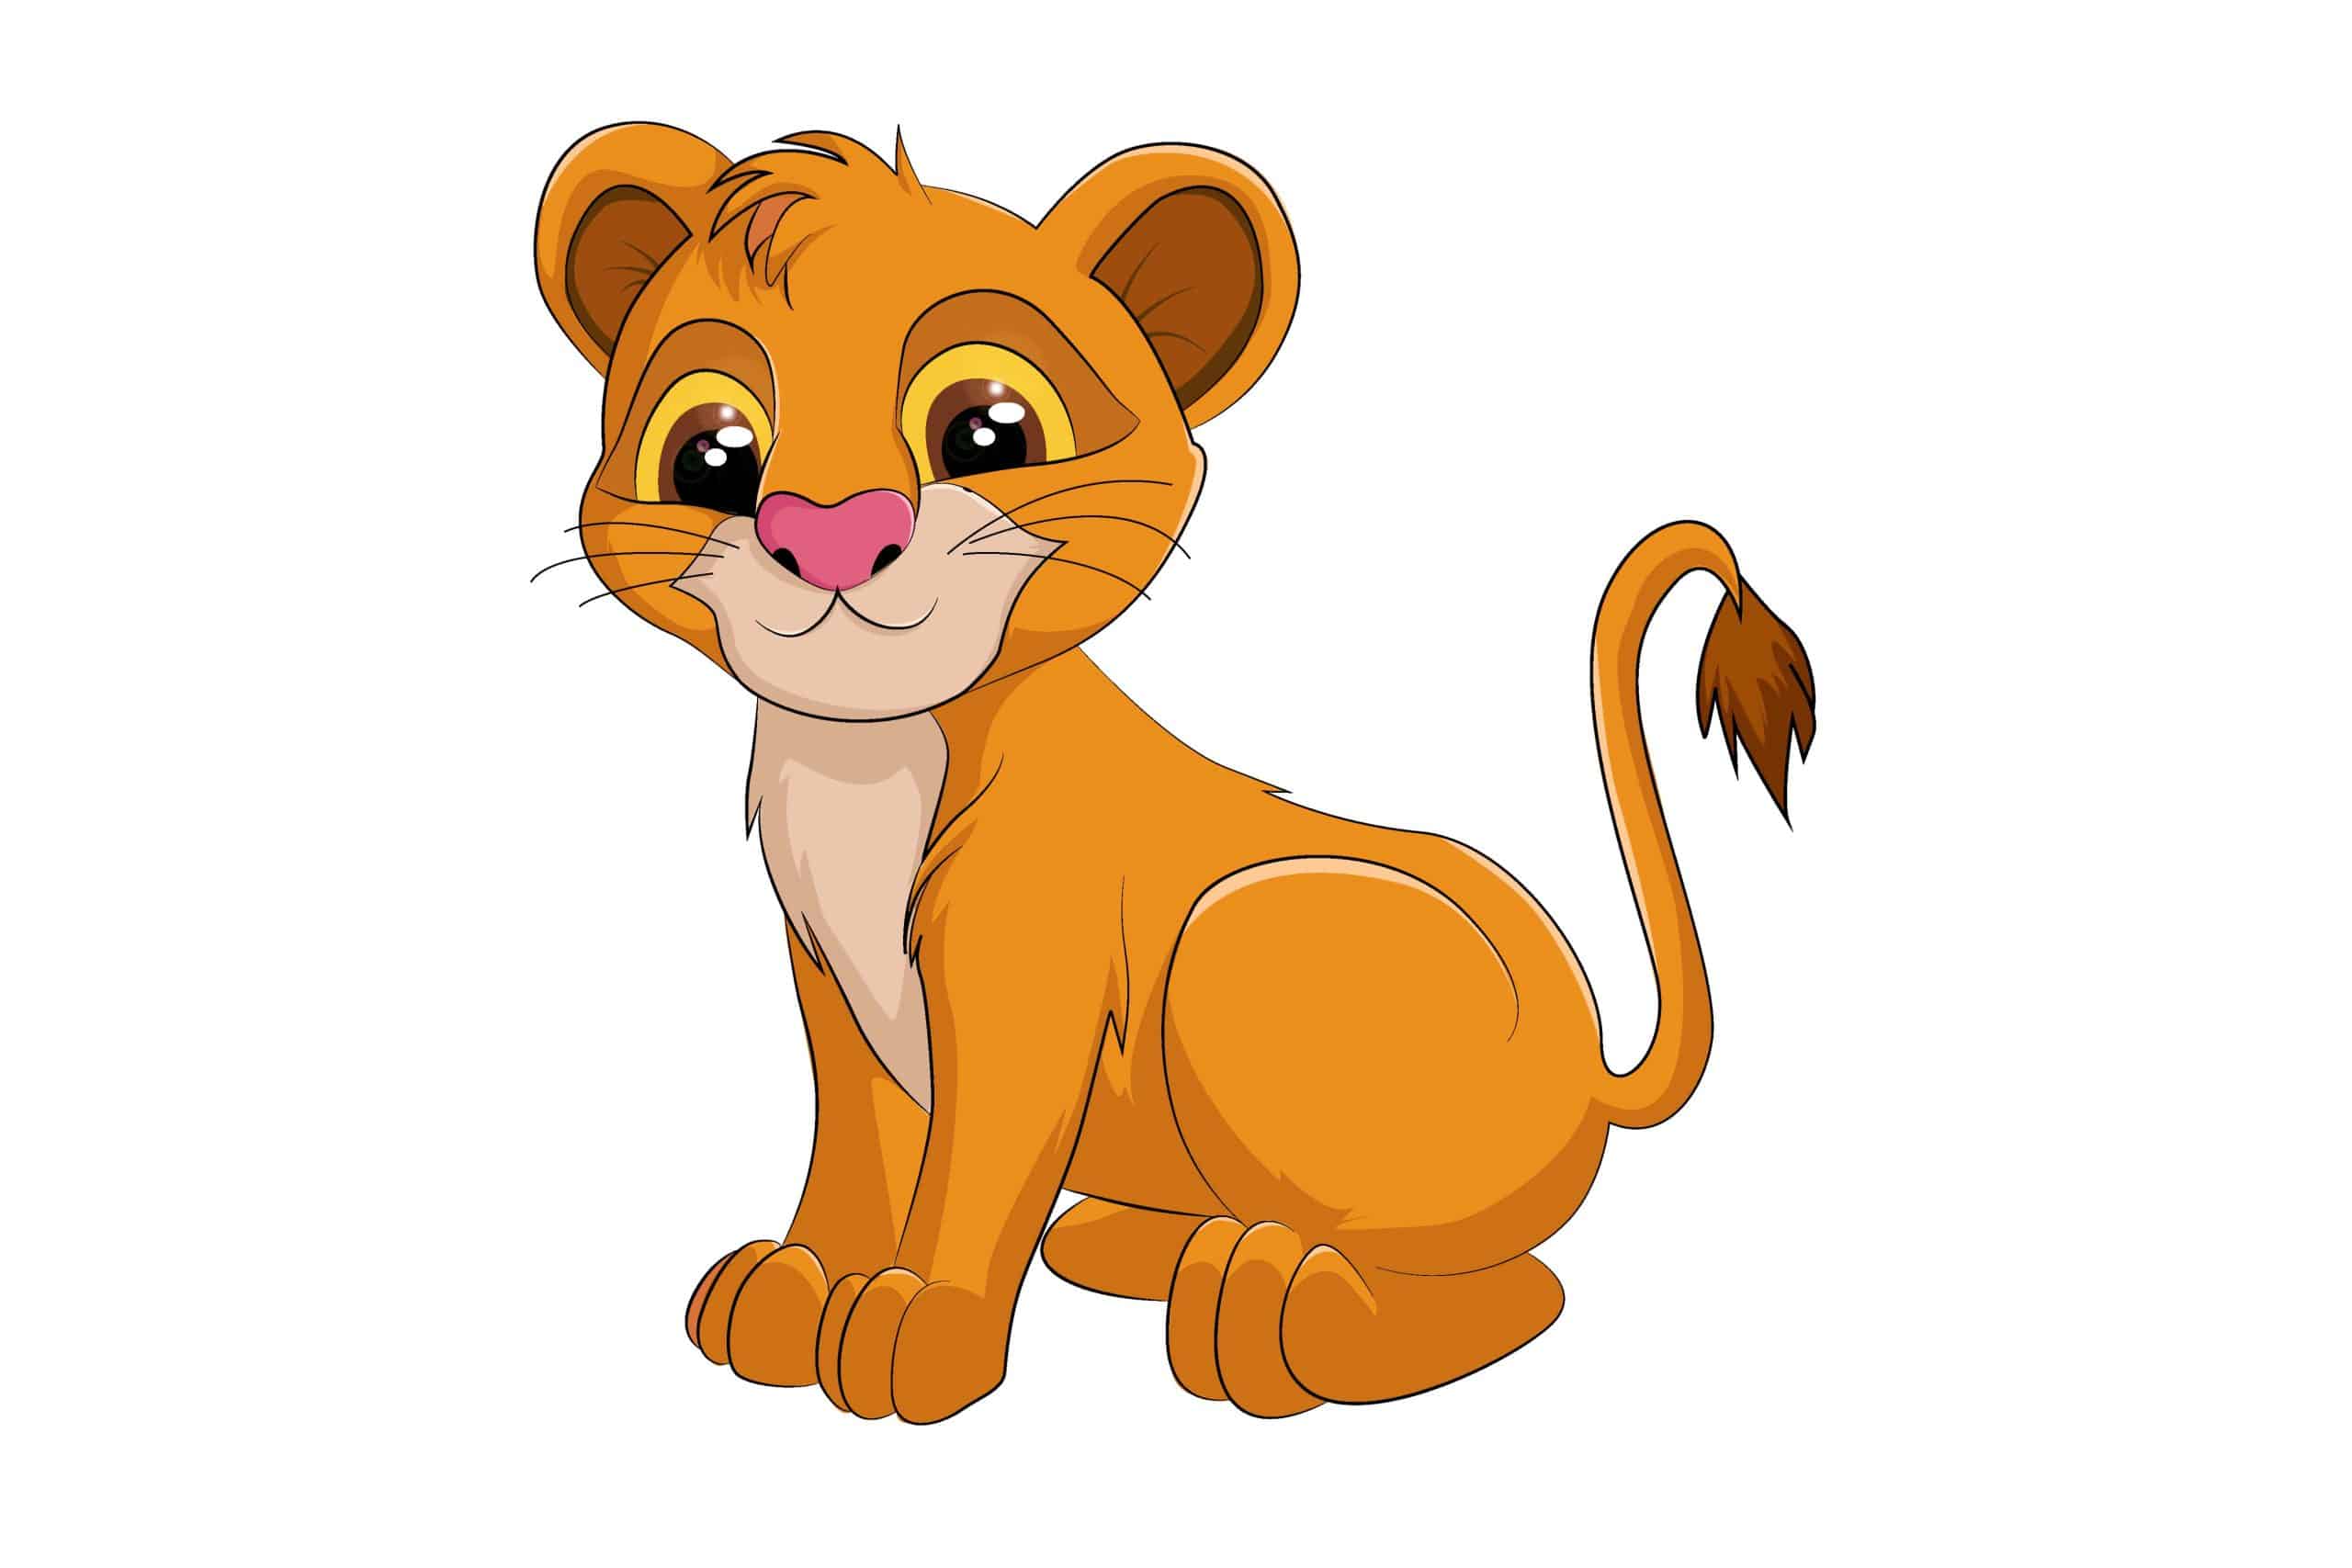 animated Simba from The Lion King